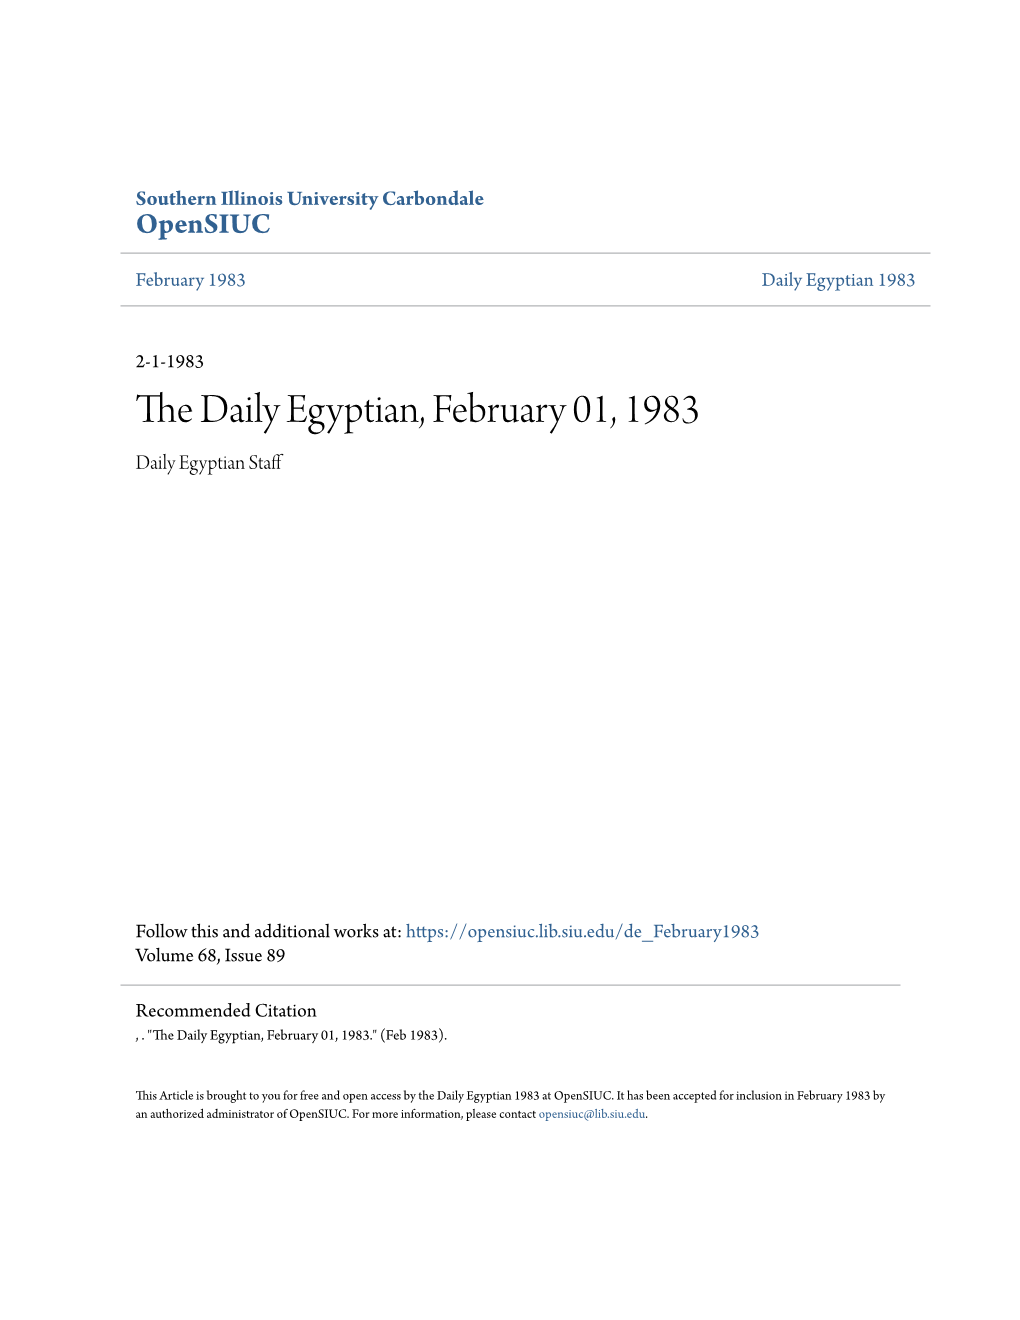 The Daily Egyptian, February 01, 1983